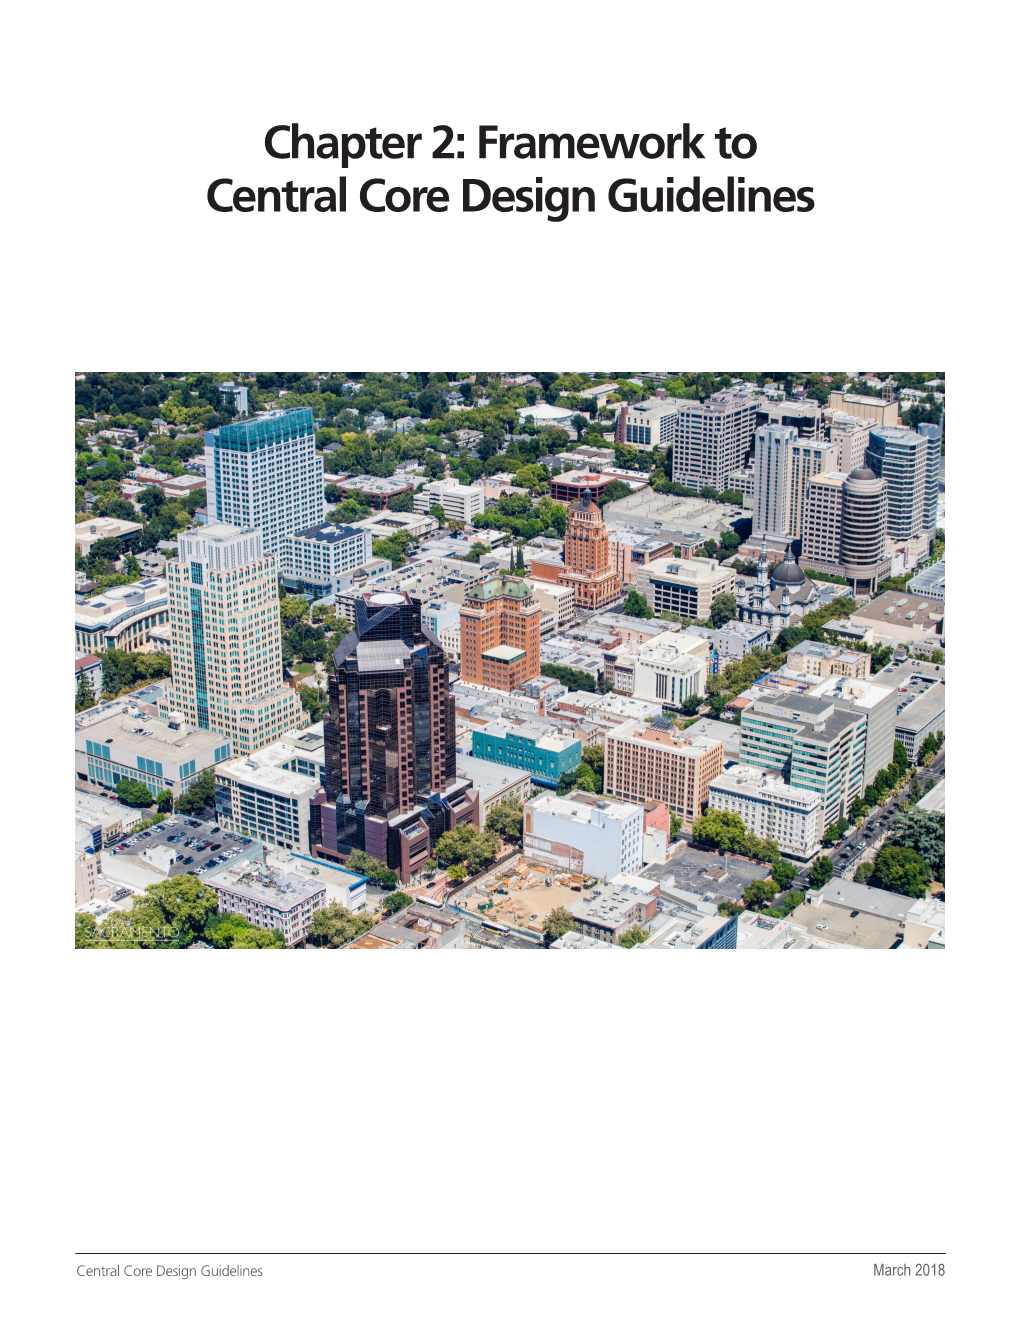 Chapter 2: Framework to Central Core Design Guidelines